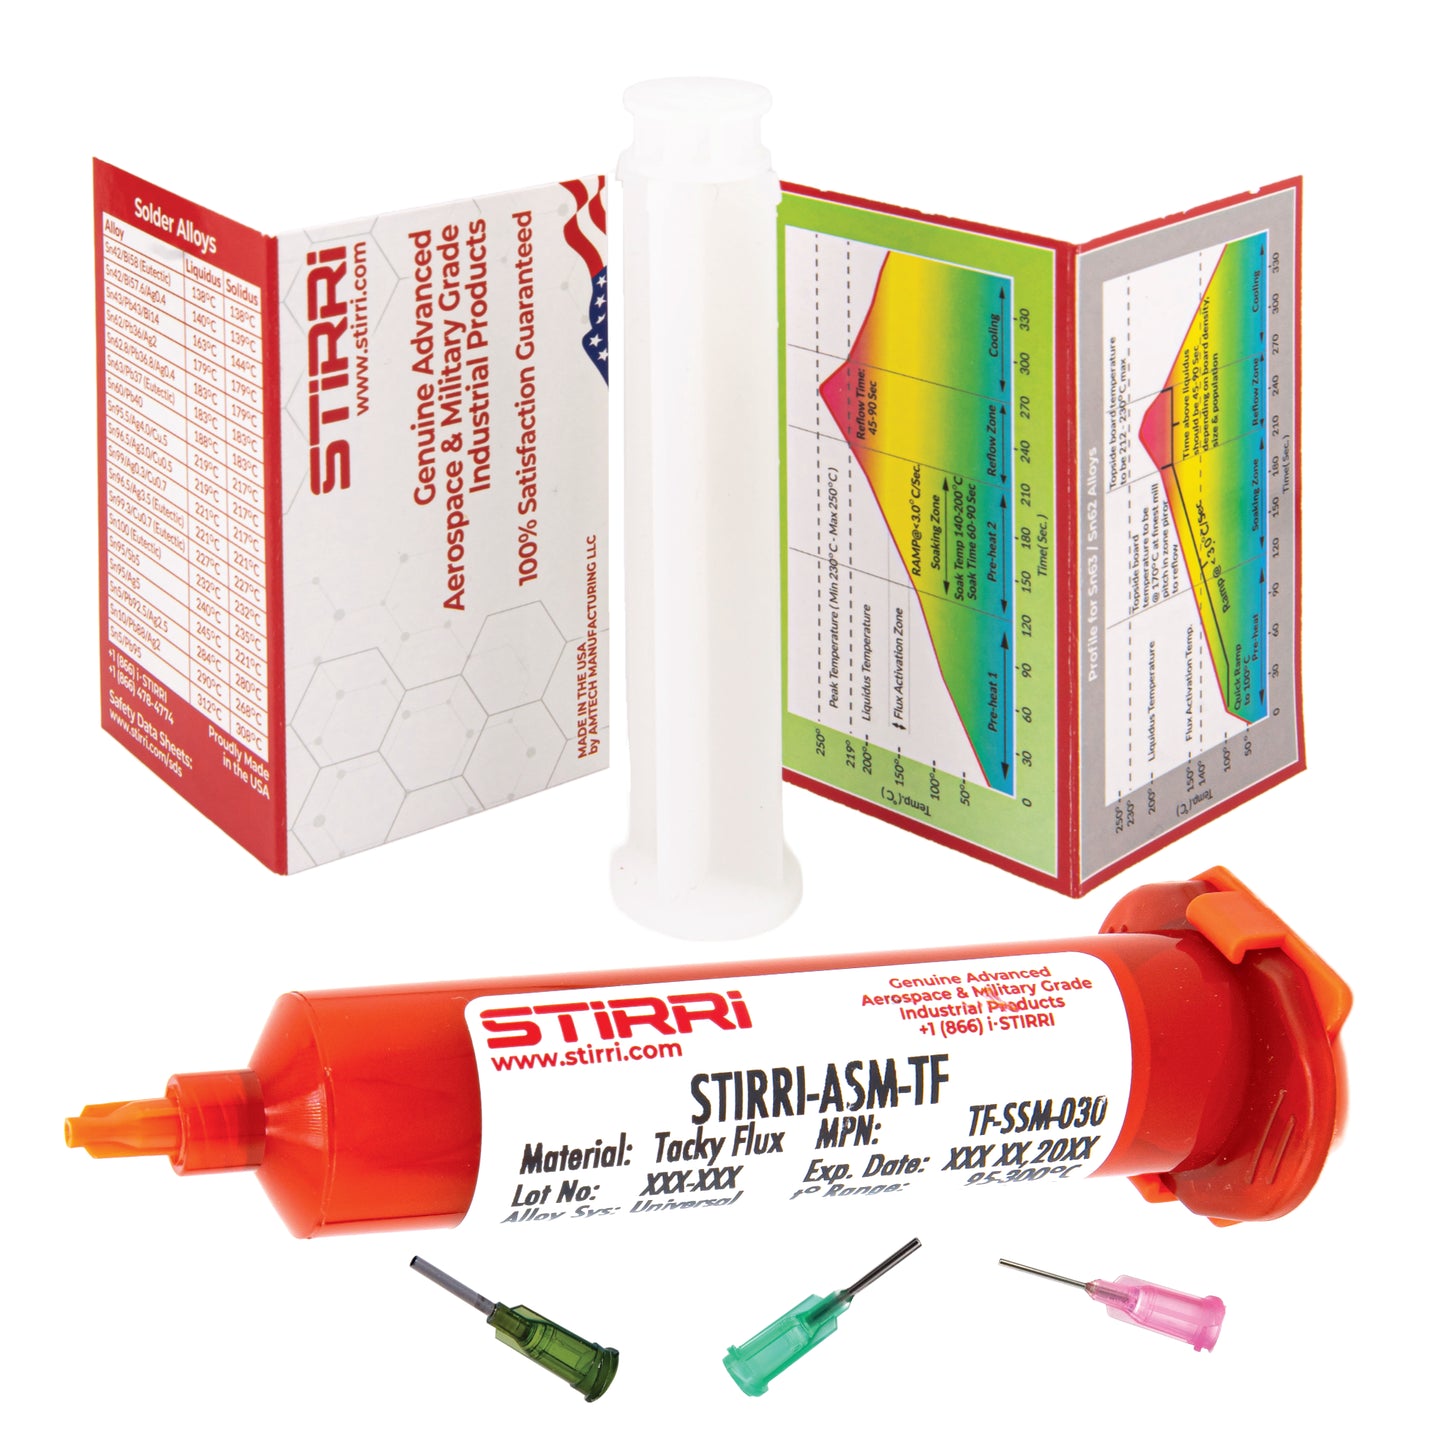 ASM-TF universal no-clean tacky soldering flux for automated assembly (ROL0)